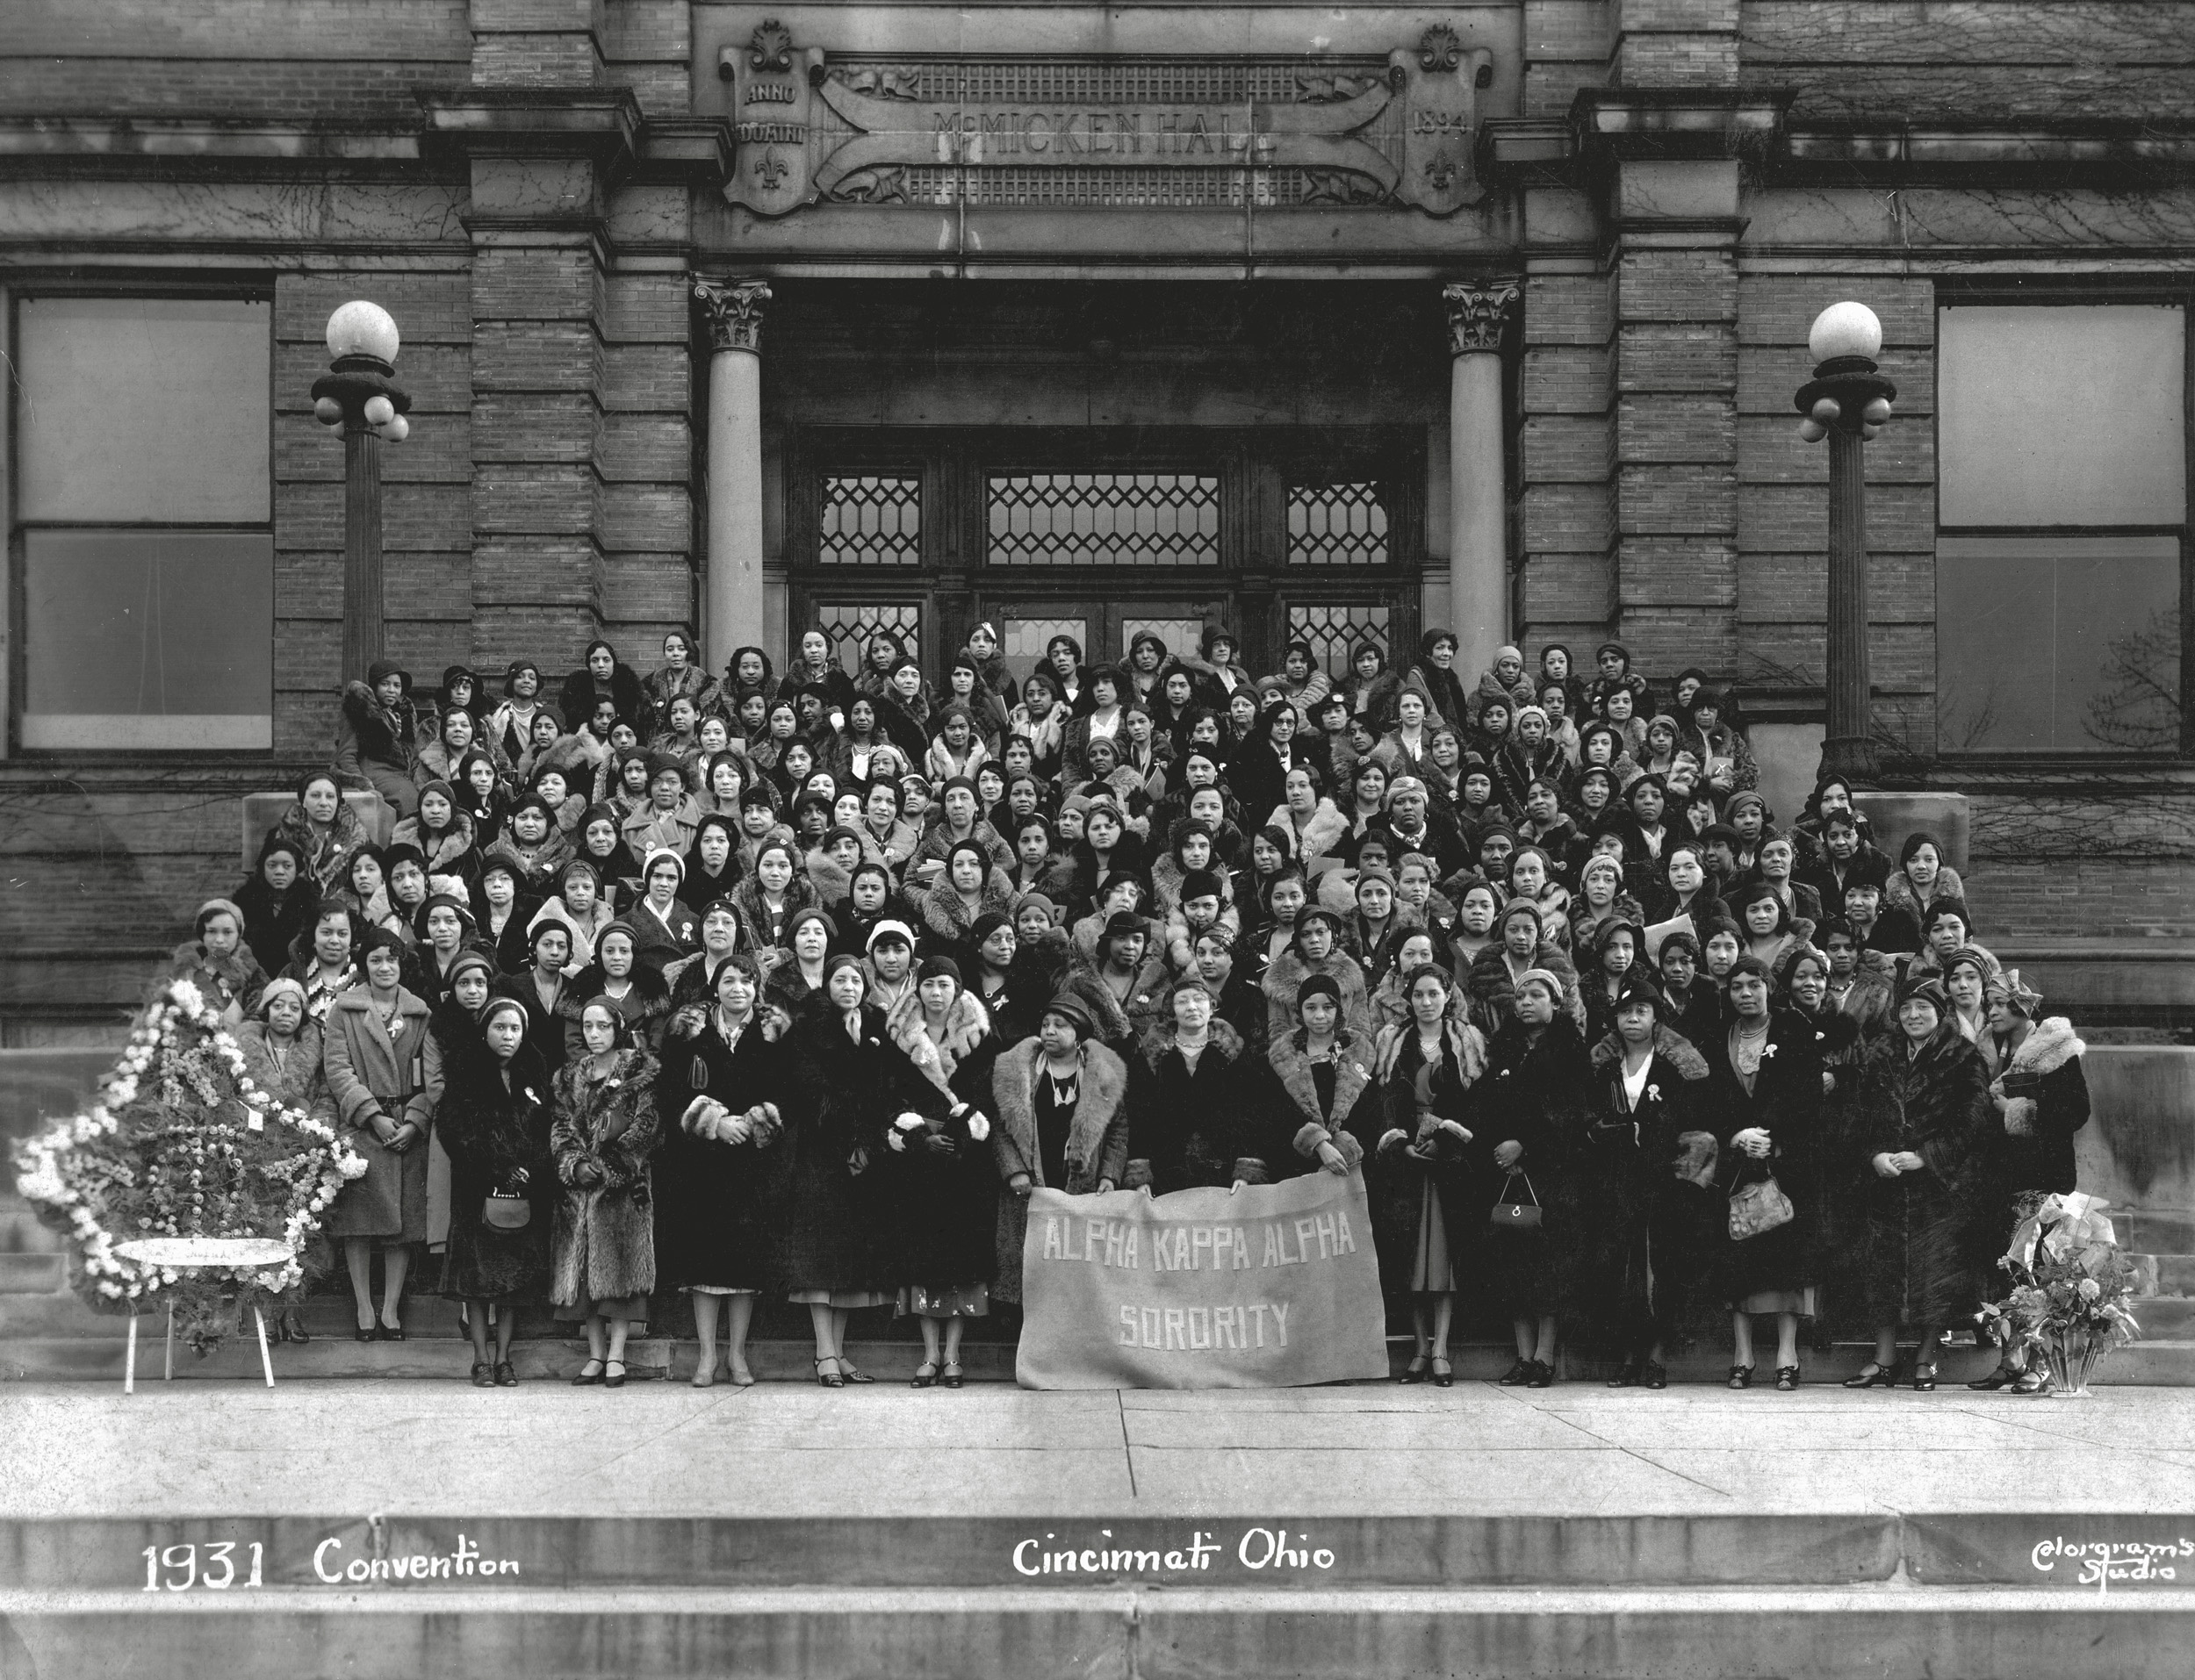 I was scanning my late mother's old photos and I came across this one.  My mother's stepmother belonged to the organization - the Alpha Kappa Alpha Sorority -  from her college days at Ohio State in the 1920s. This is their 1931 convention at the University of Cincinnati. She's in there somewhere. View full size.